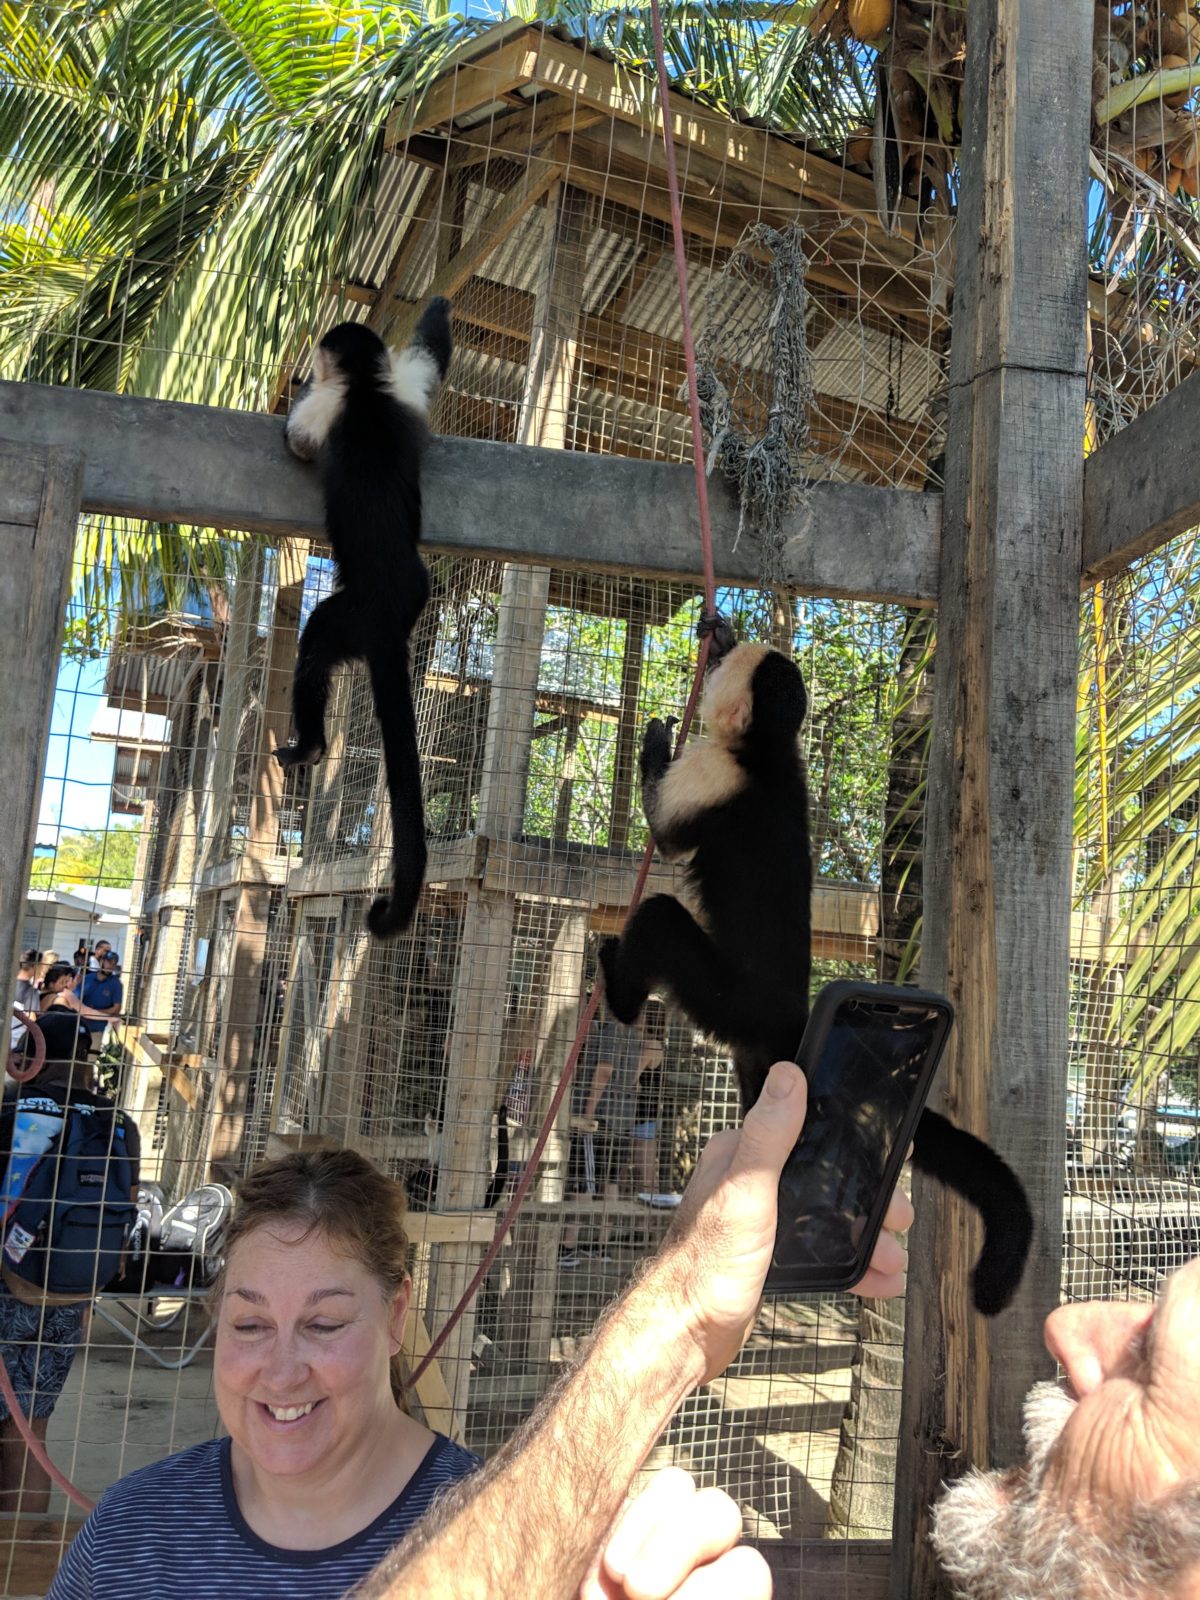 Spider monkeys in cage with unsuspecting guests